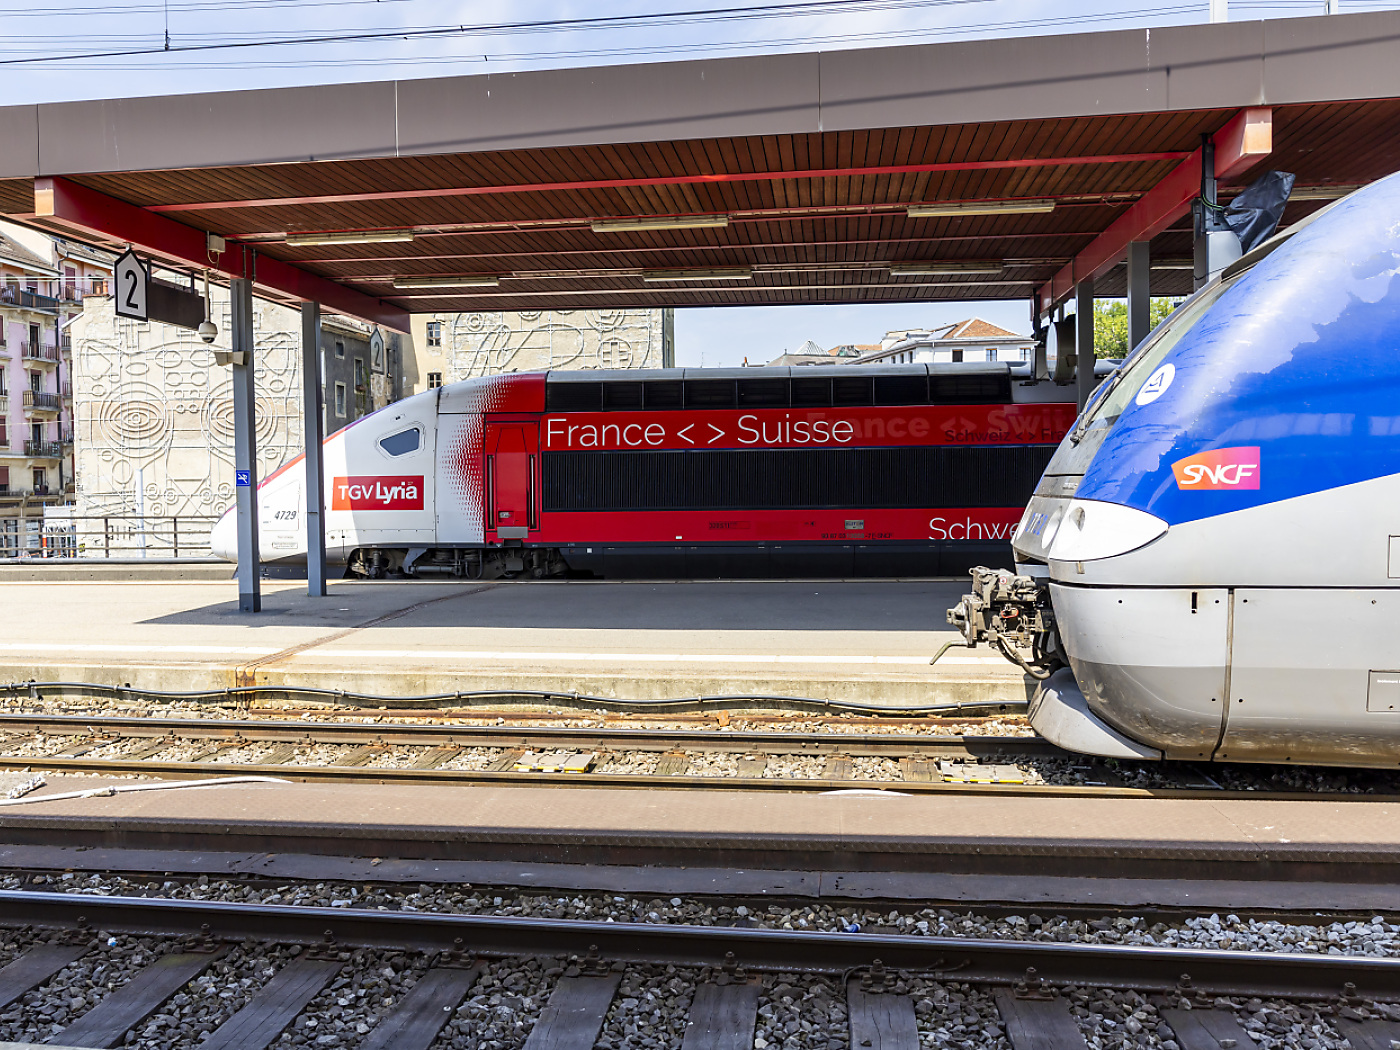 VCS calls for direct international rail connections from Geneva